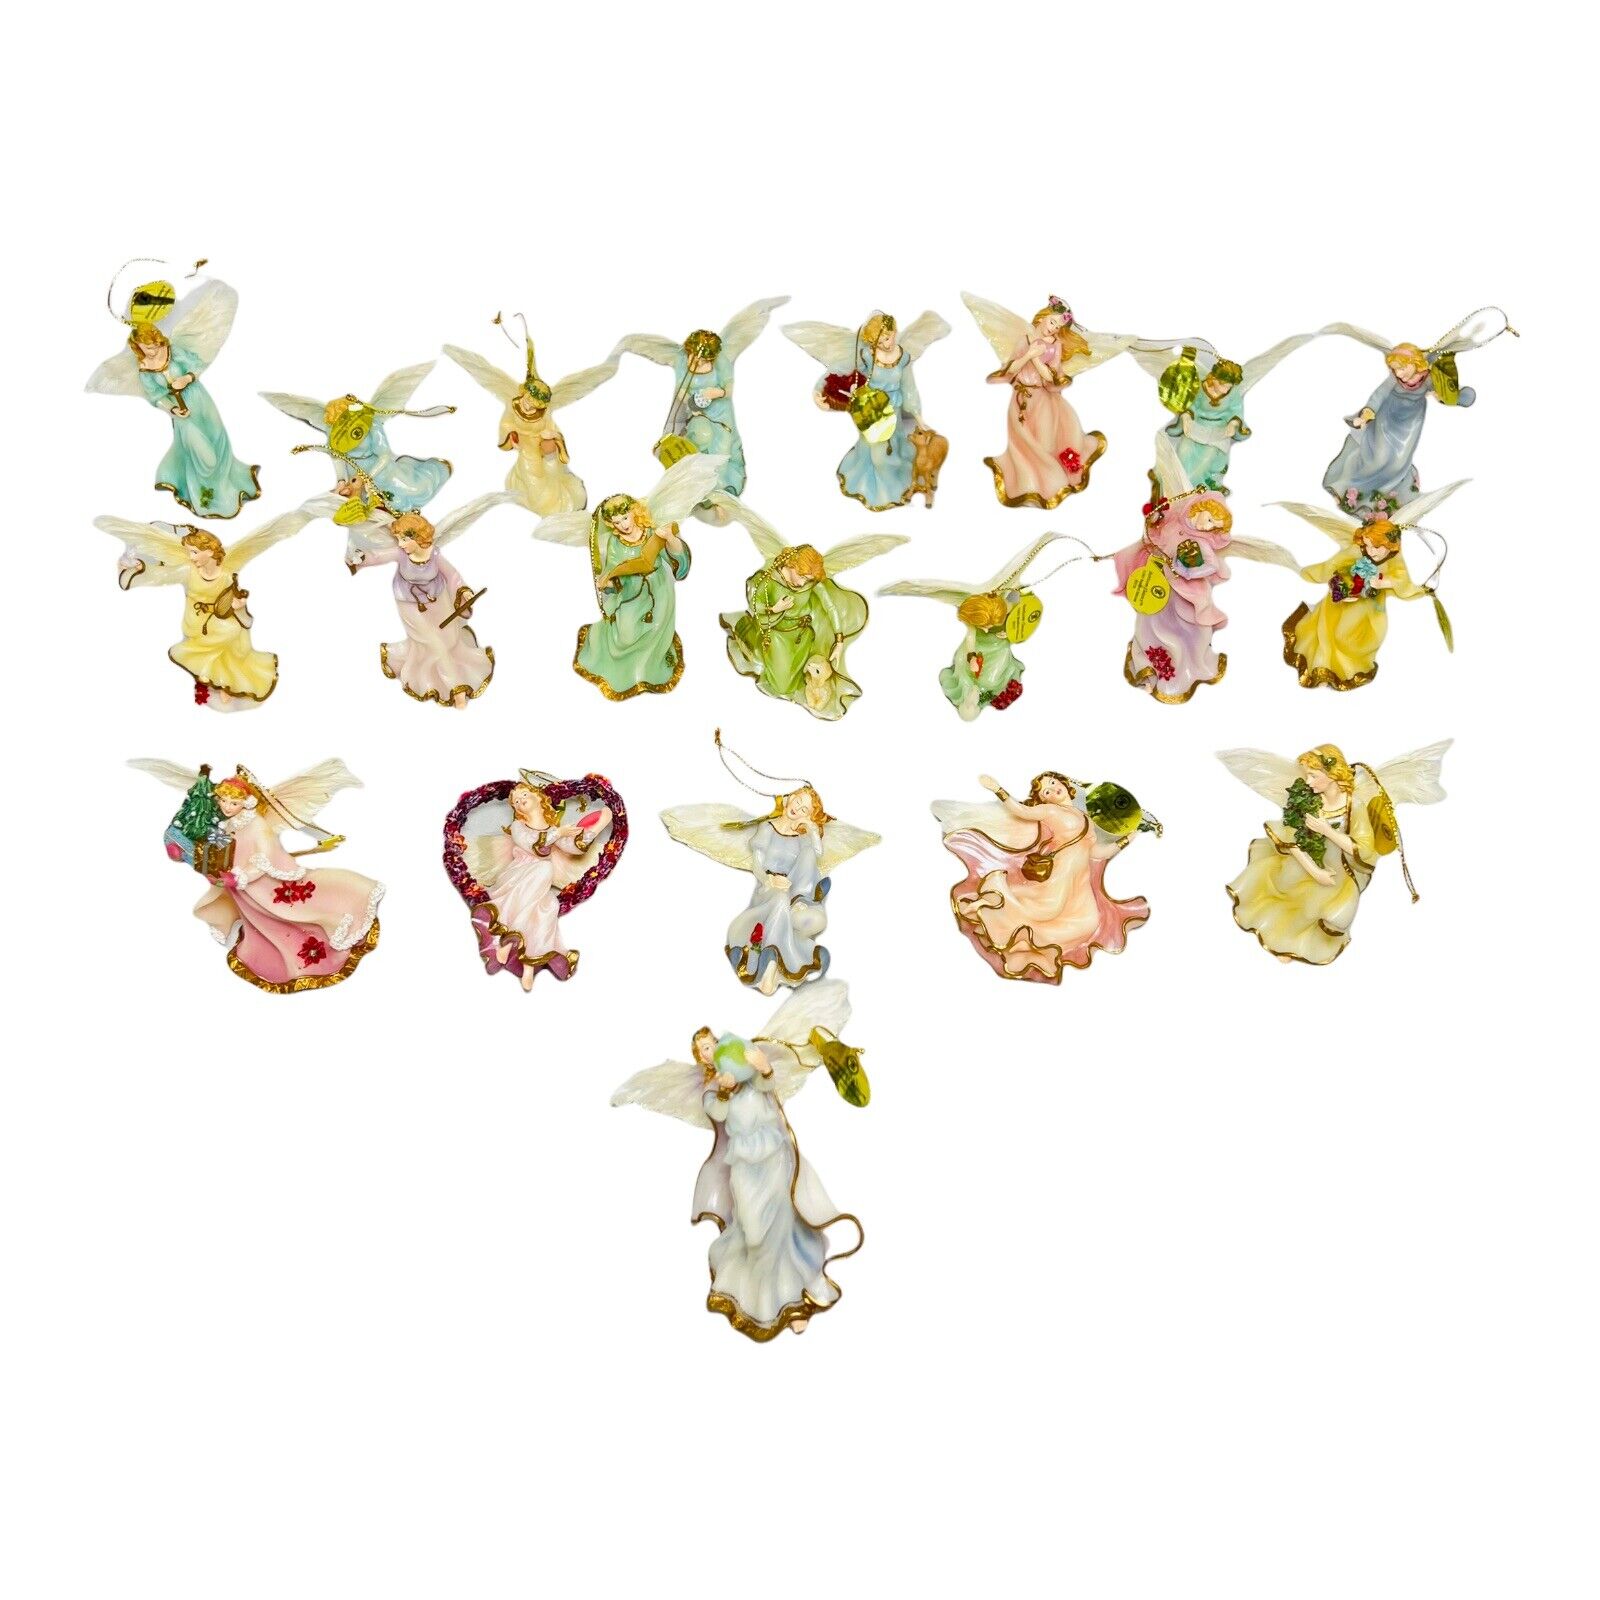 21 Bradford Editions Heirloom Classics Millennial  Angels Ornaments With Tags